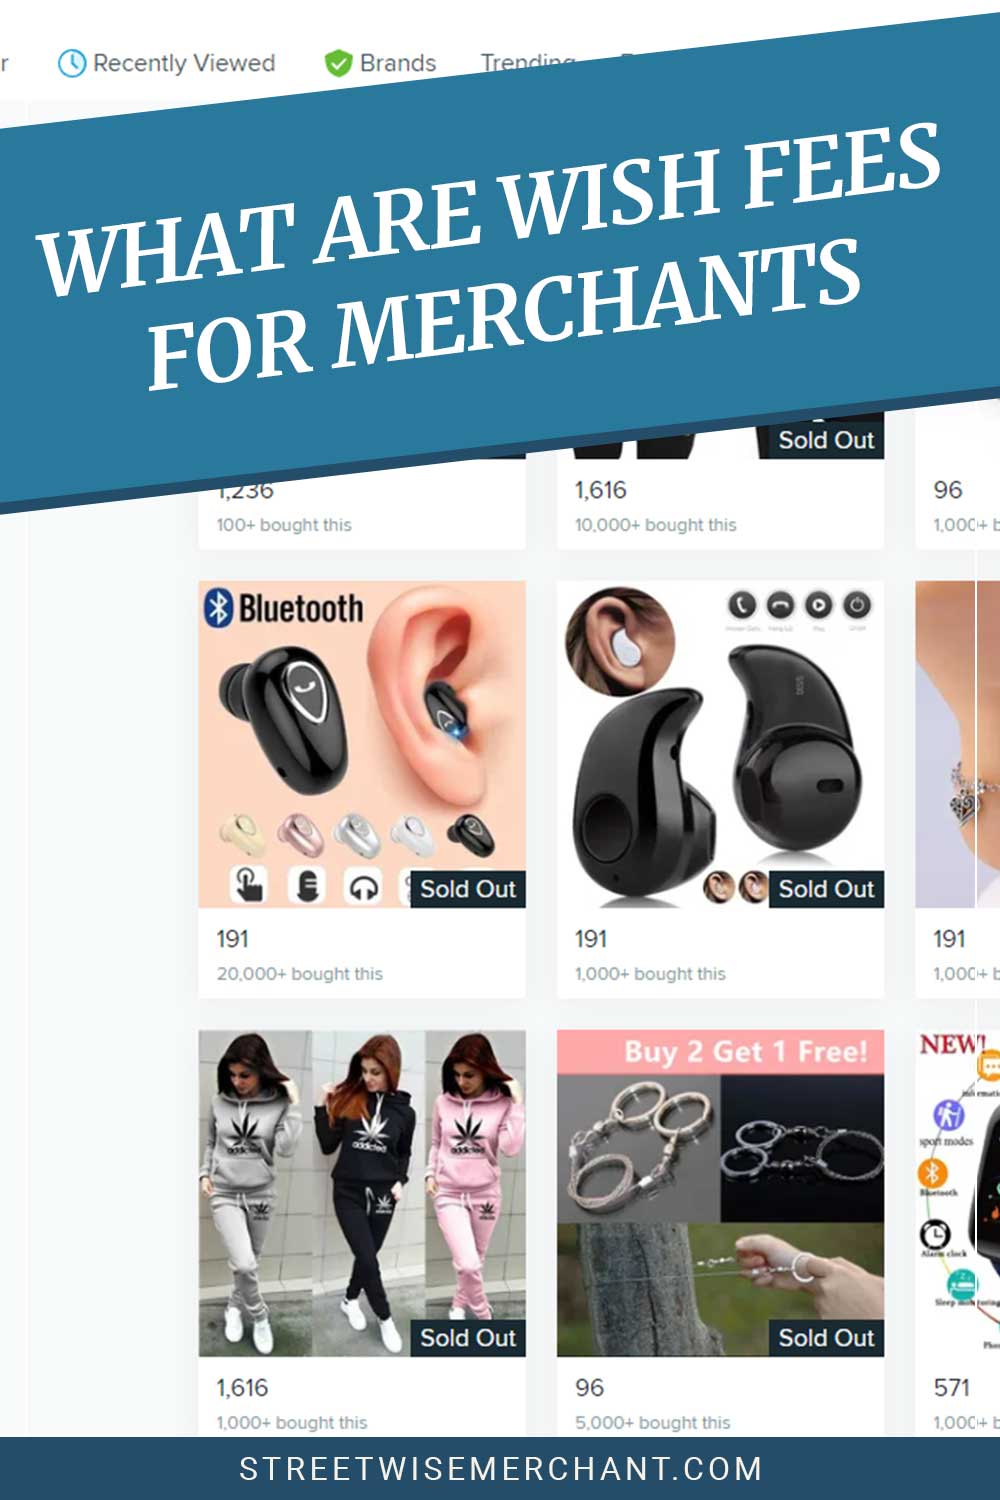 What Are Wish Fees for Merchants?